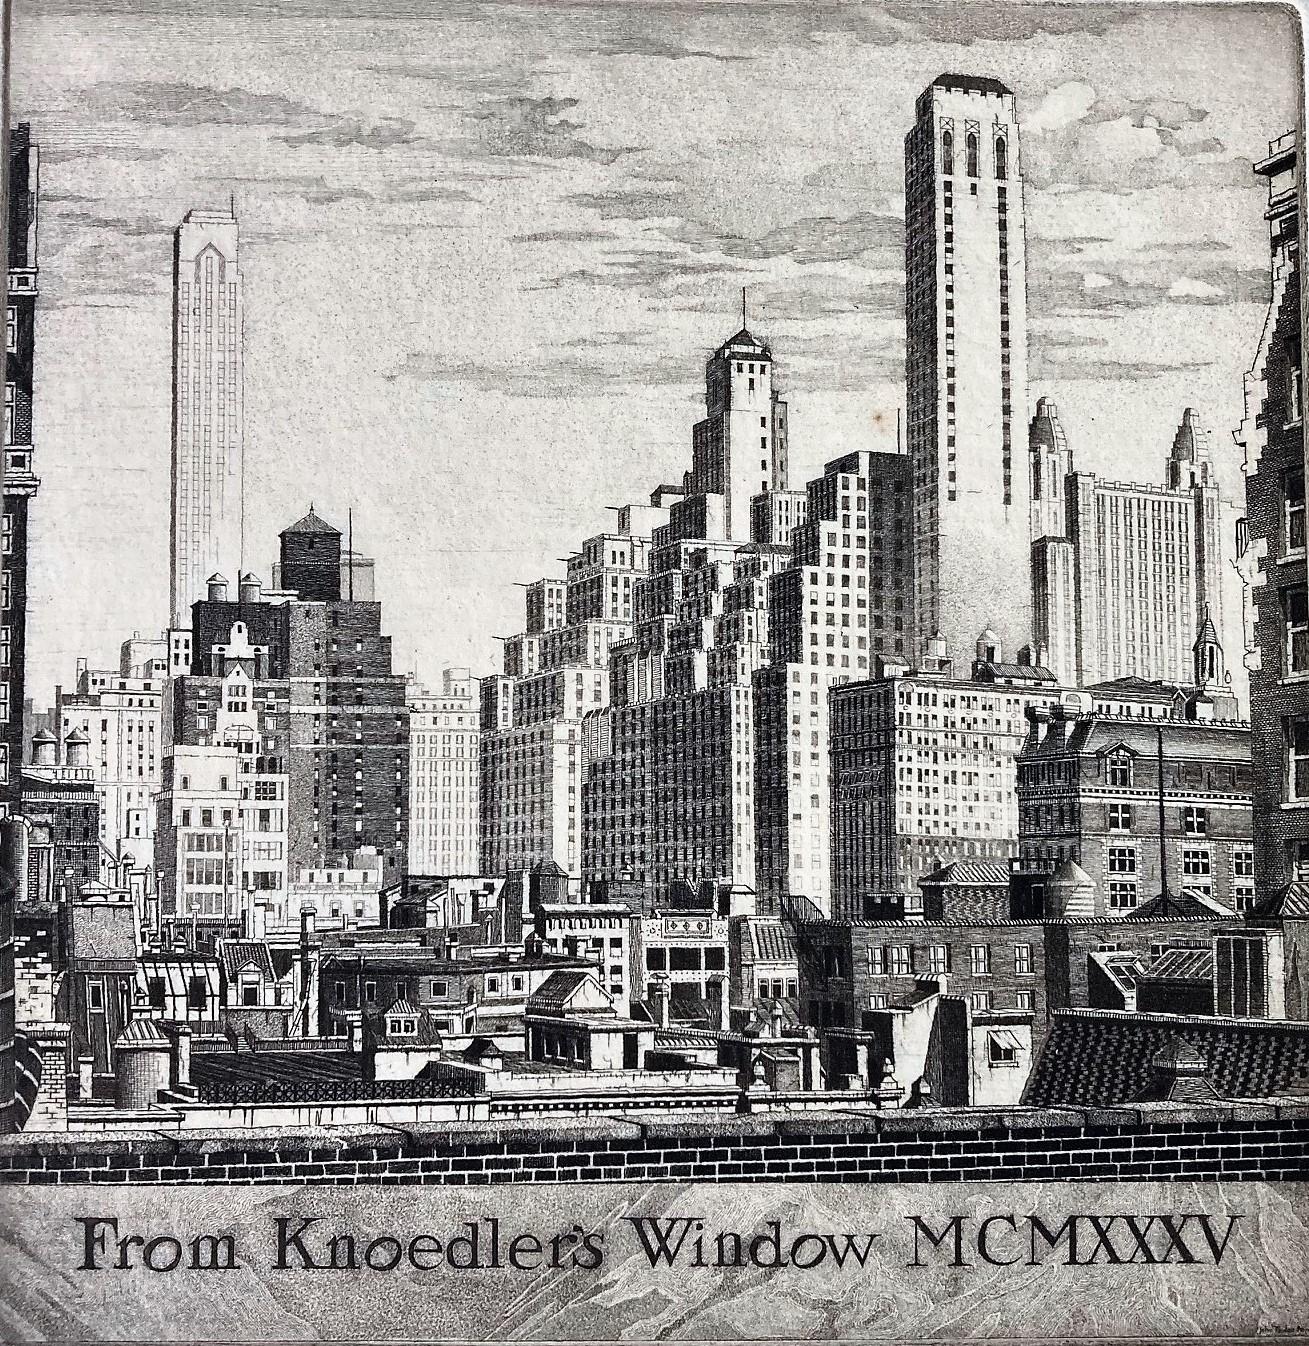 From Knoedler's Window MCMXXXV - Print by John Taylor Arms